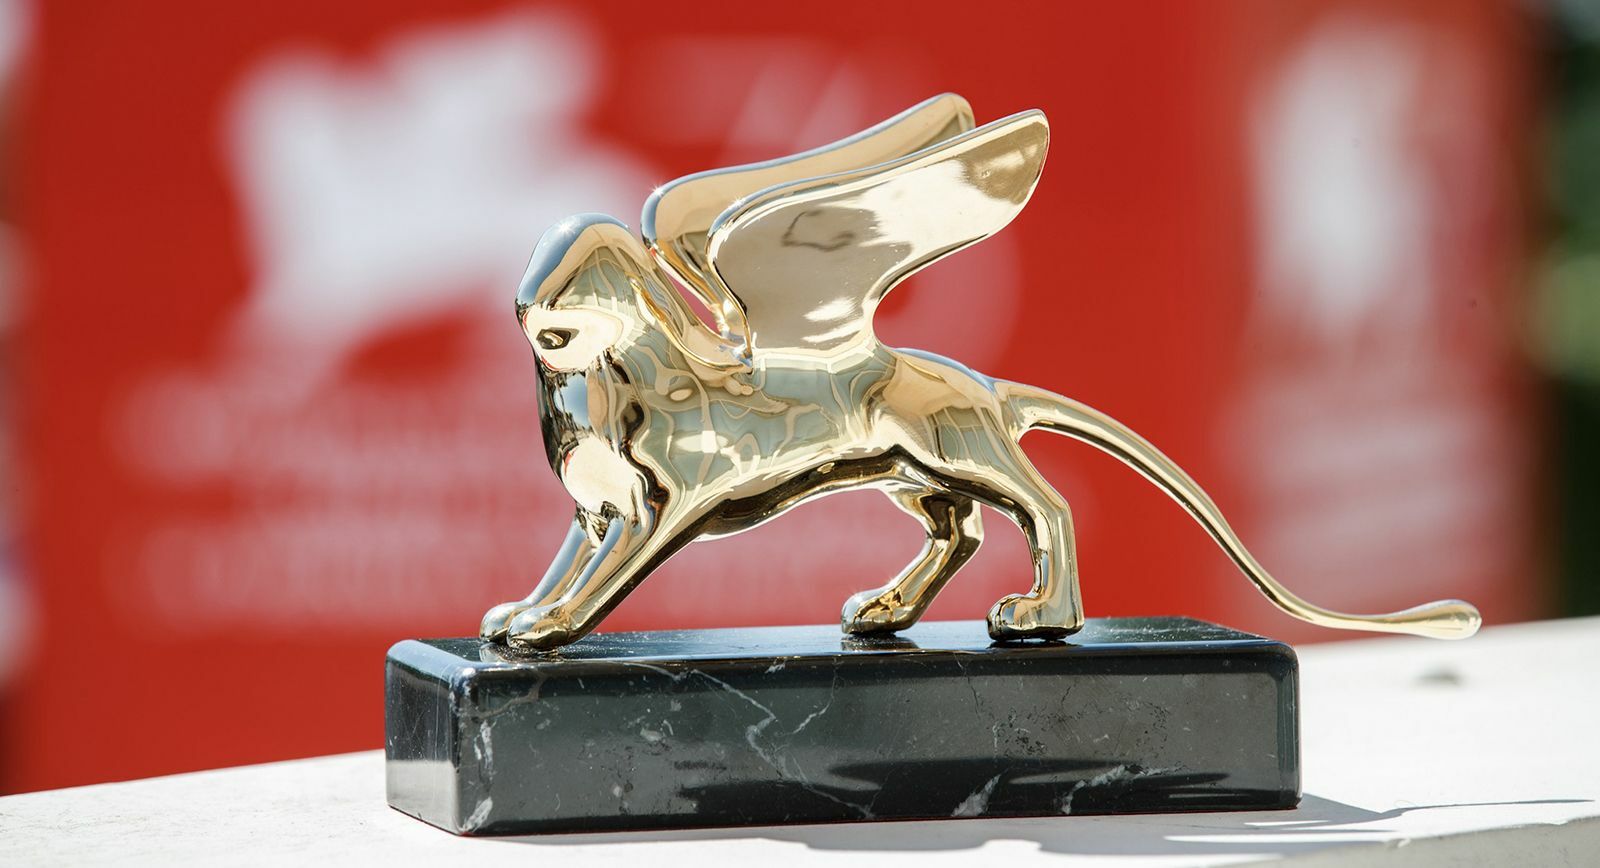 The Cartier Golden Lion awarded at the Venice Film Festival 2022